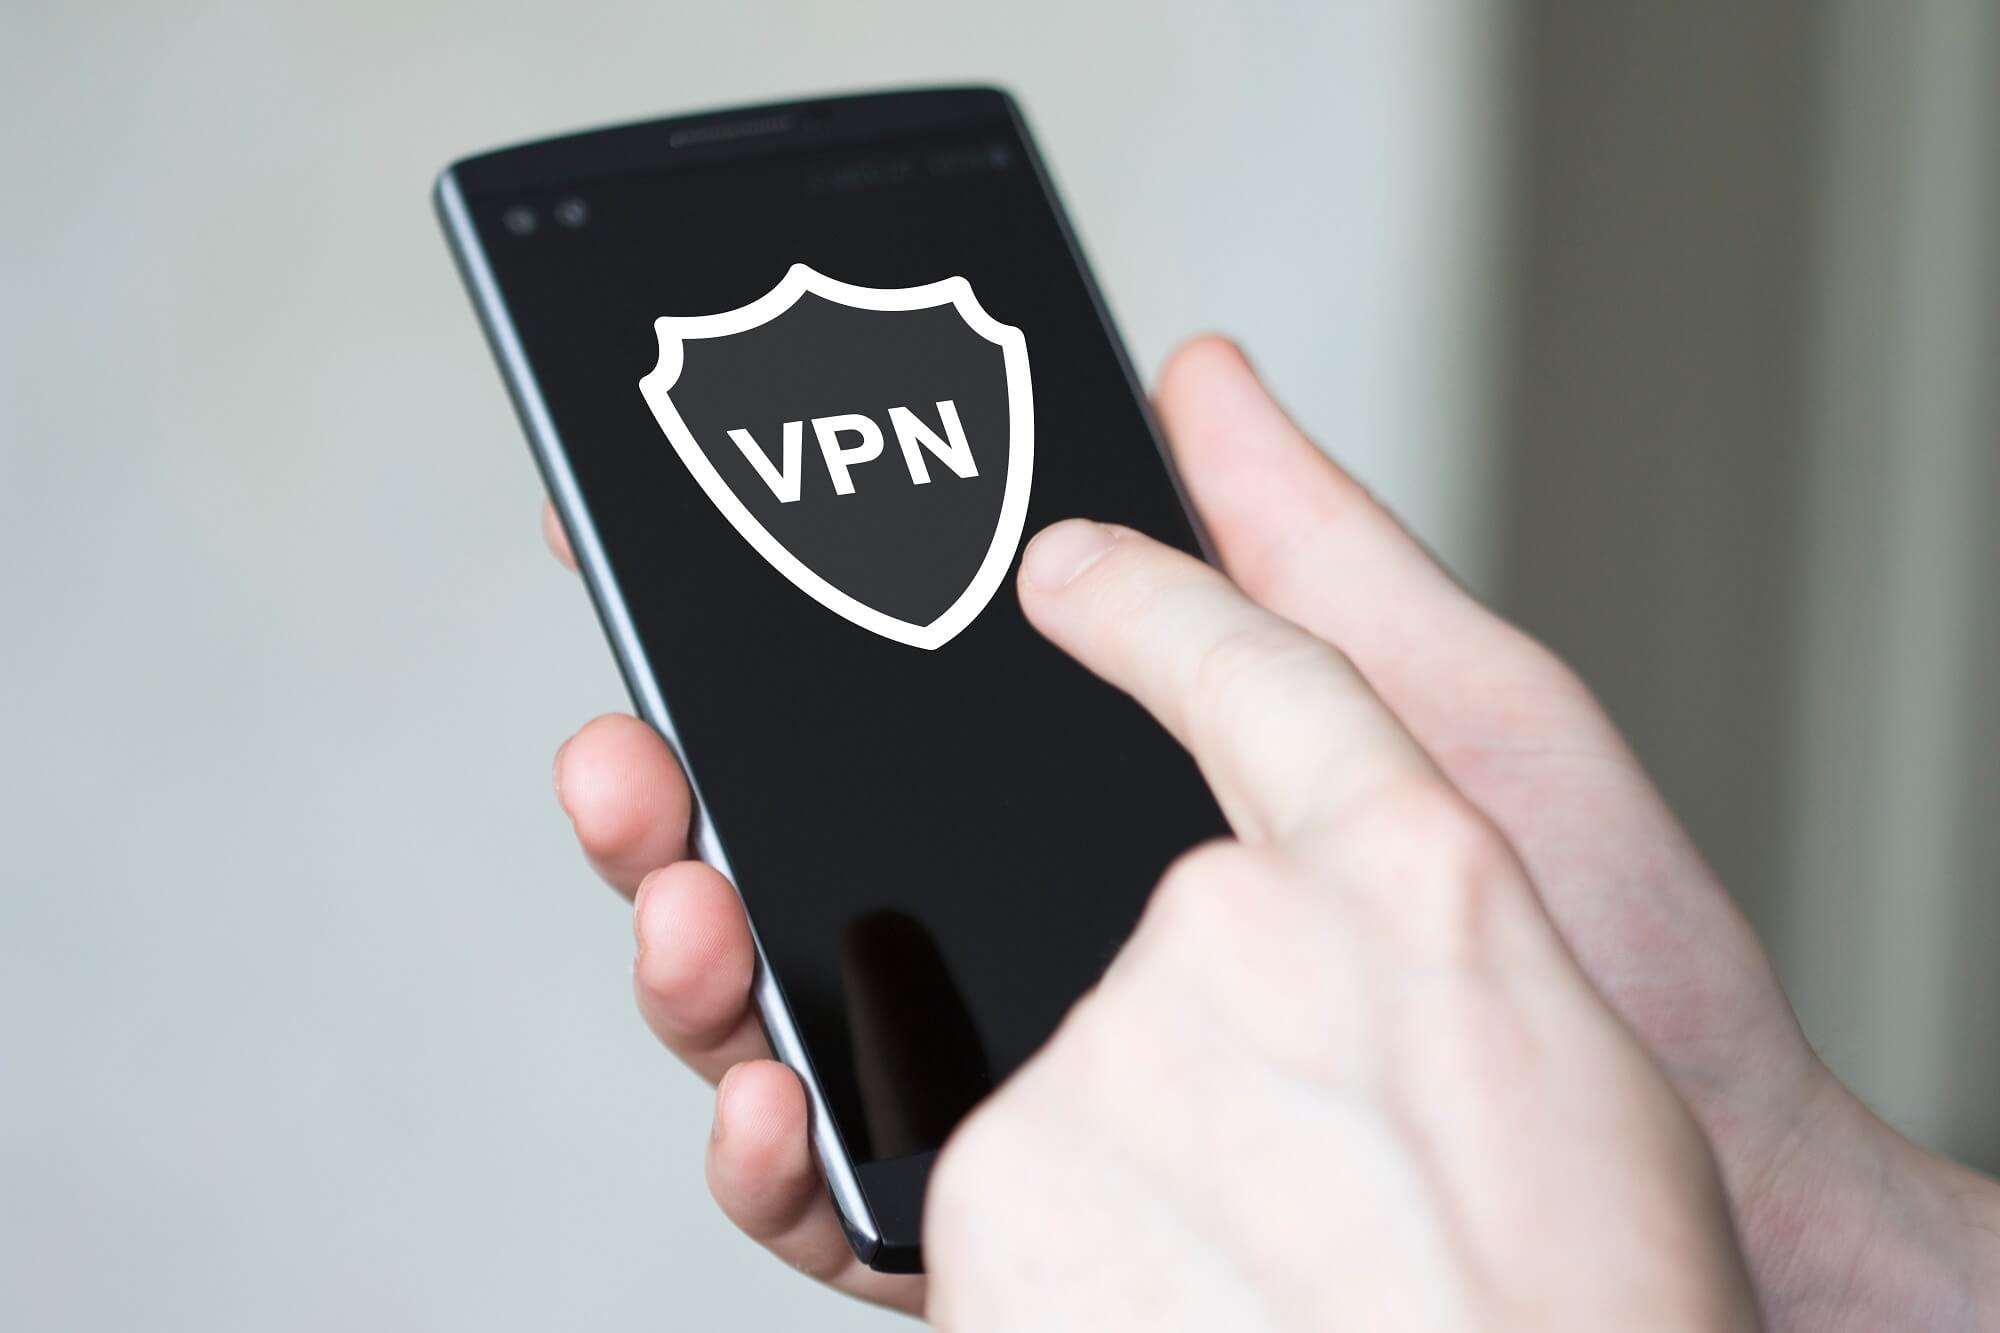 VPN on Android devices